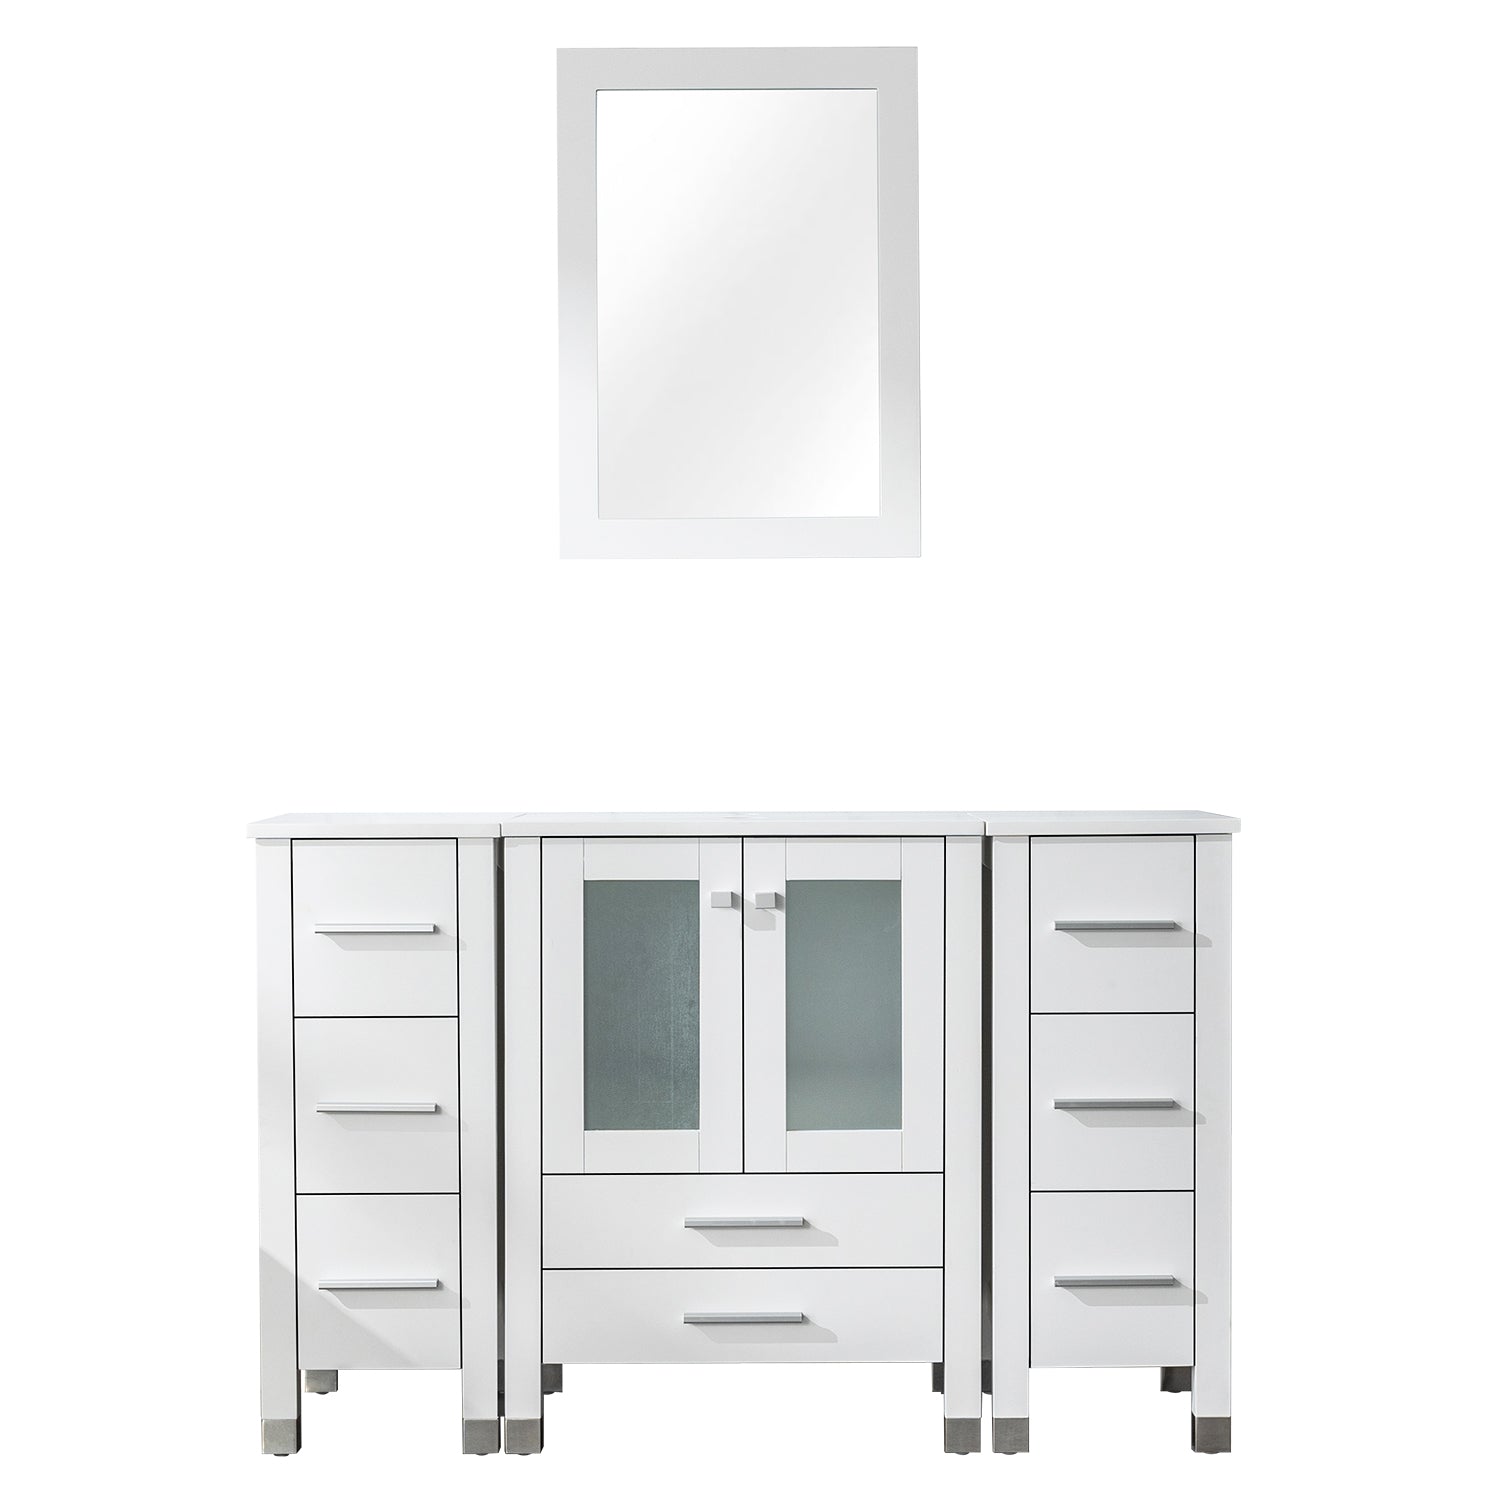 Classic 48" White Freestanding Bathroom Vanity side cabinet combo with Single Sink & Mirror